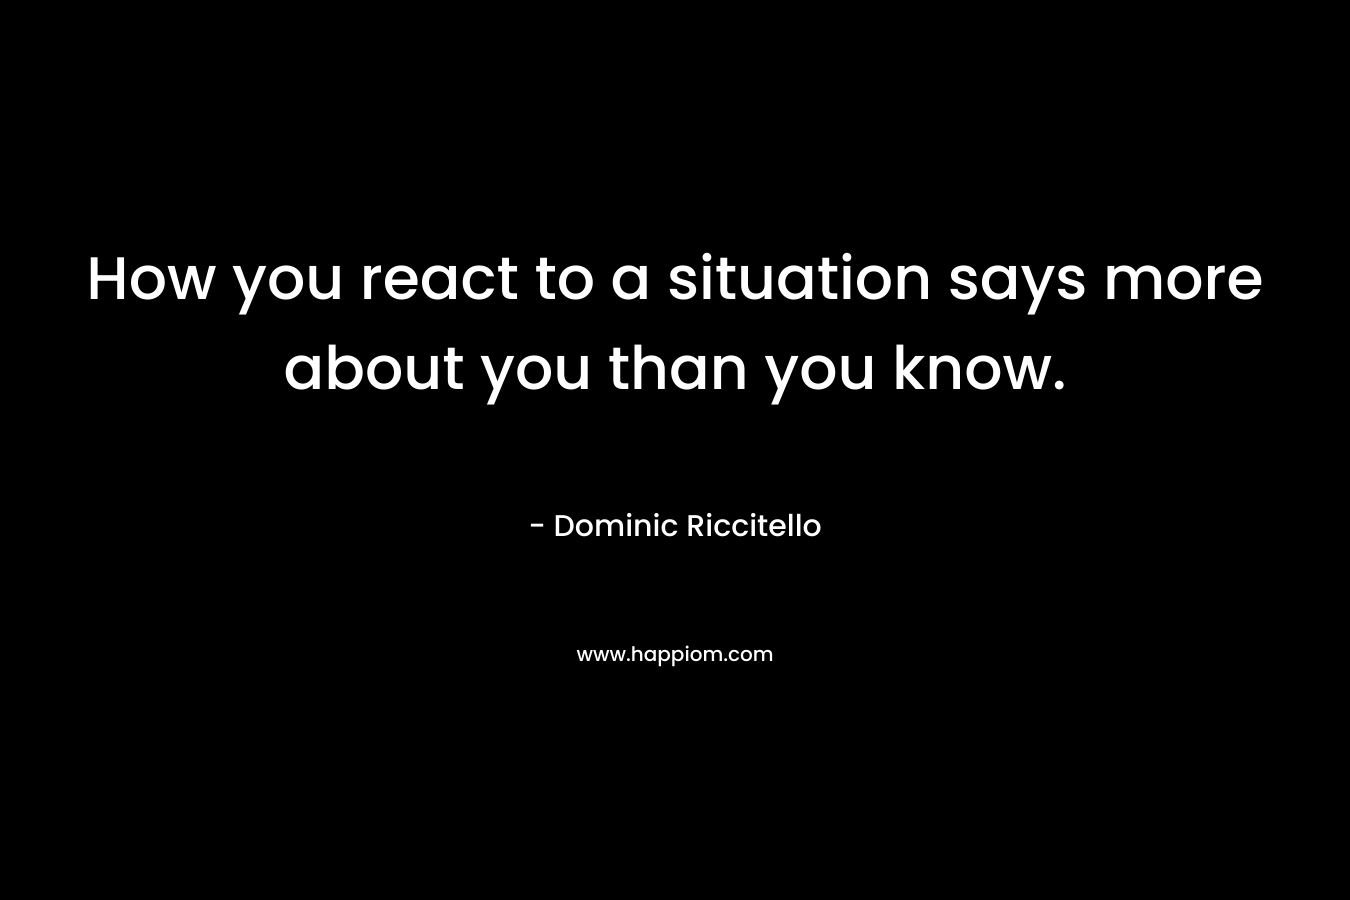 How you react to a situation says more about you than you know.